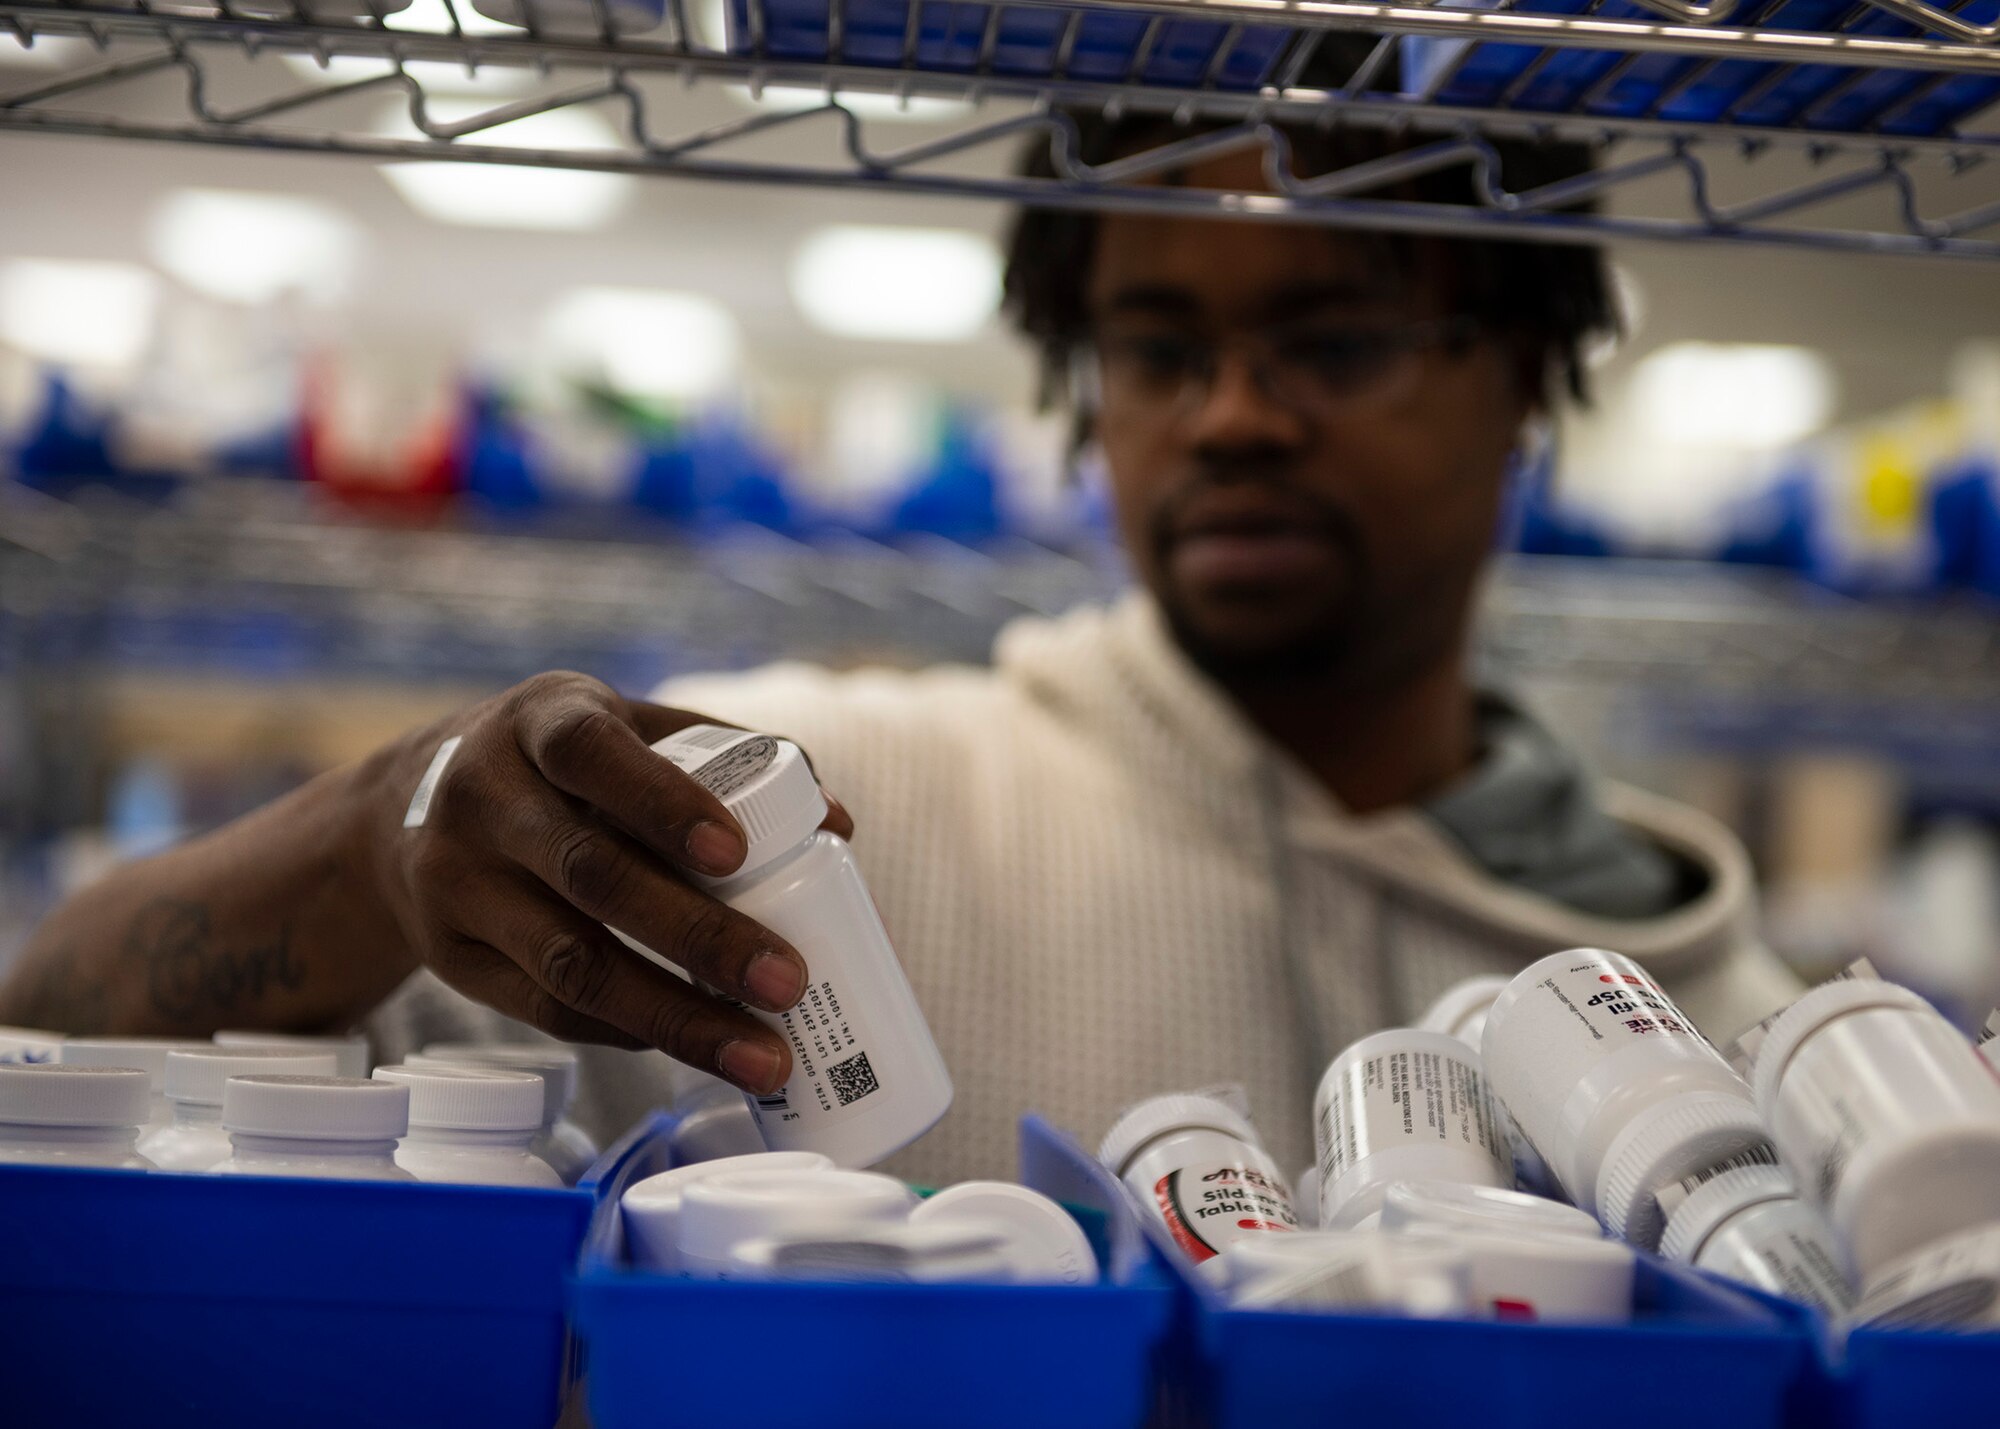 A pharmacy technician reaches a bottle of medication.